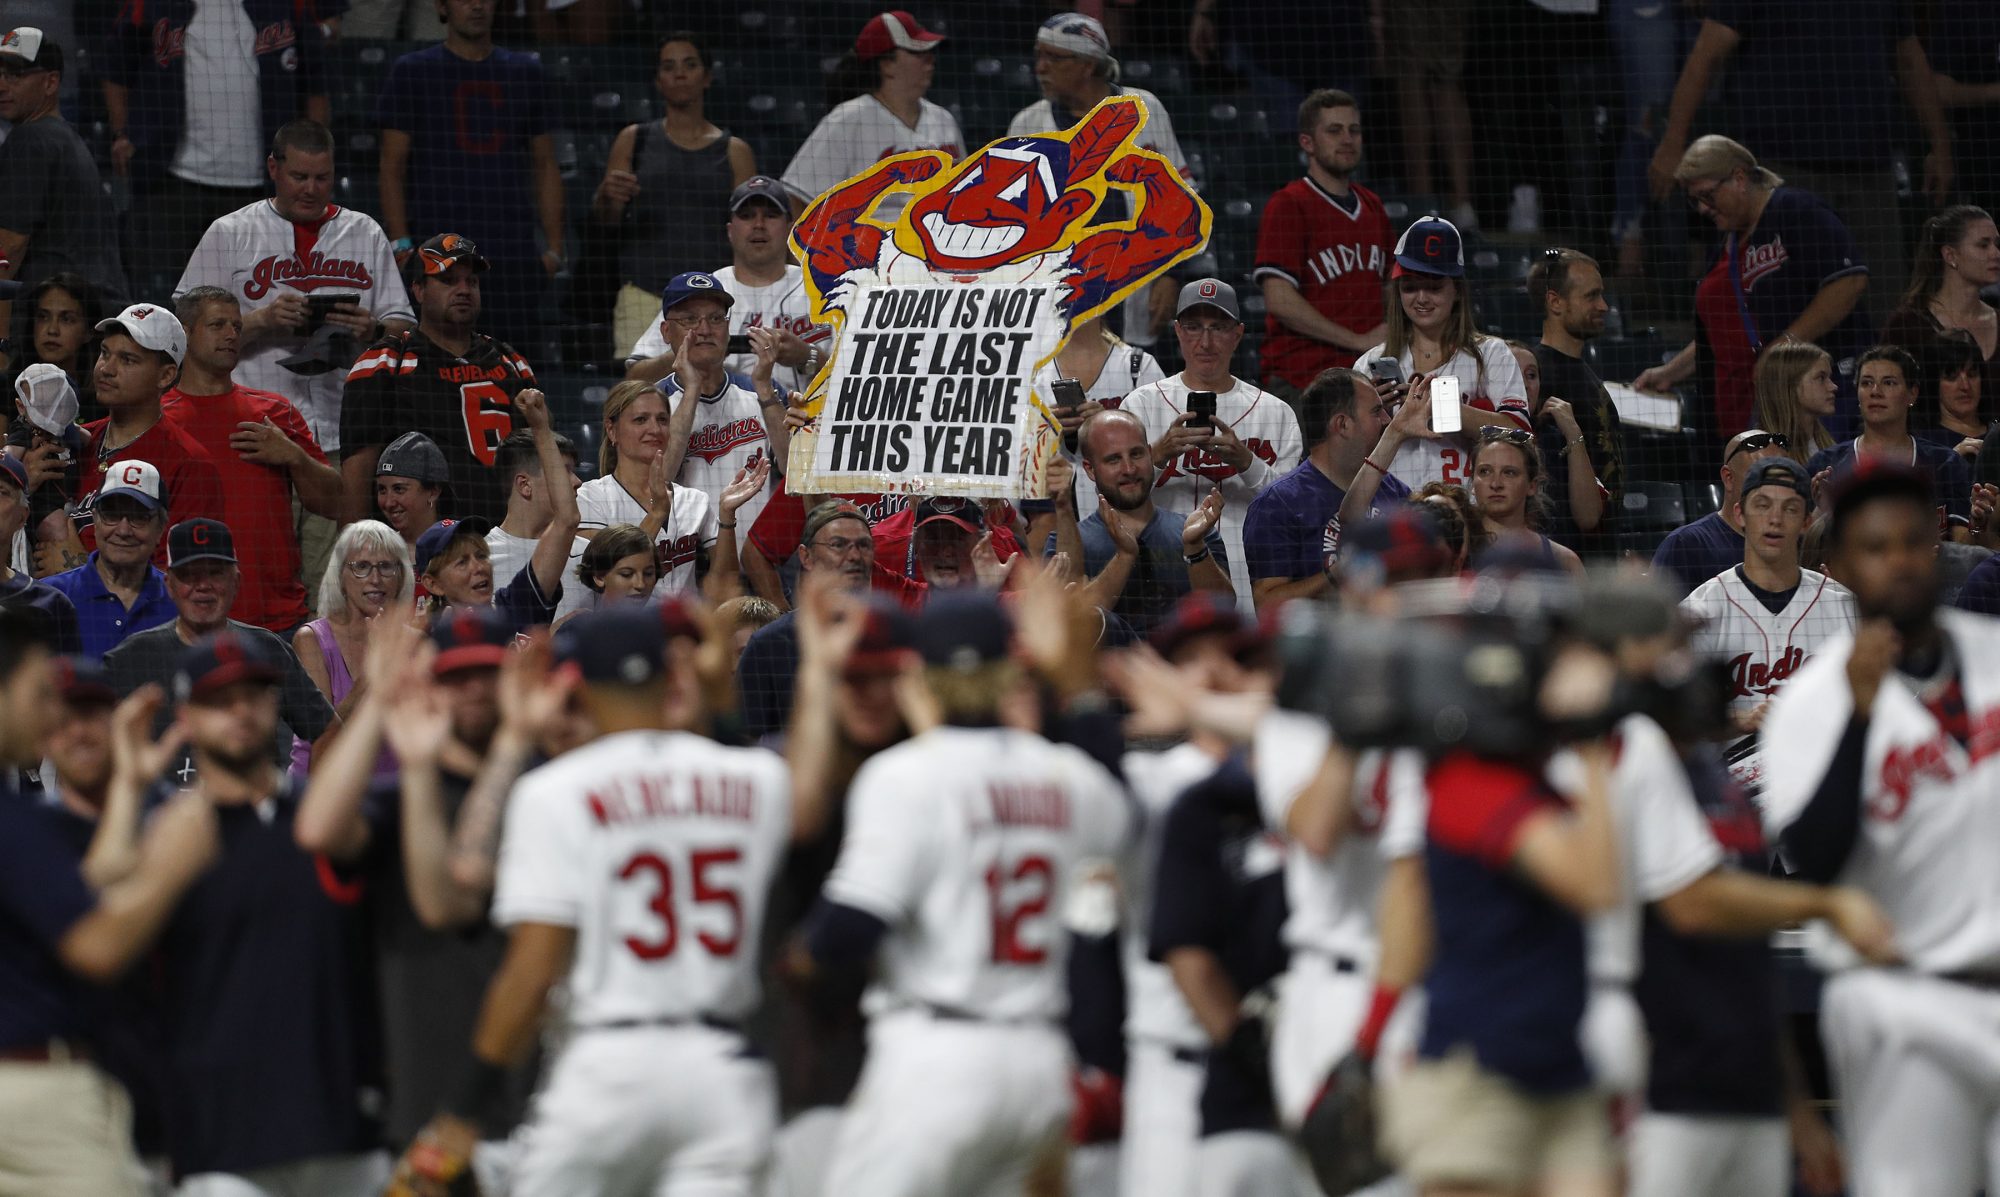 Fans hold up a Chief Wahoo sign at a Cleveland baseball game.